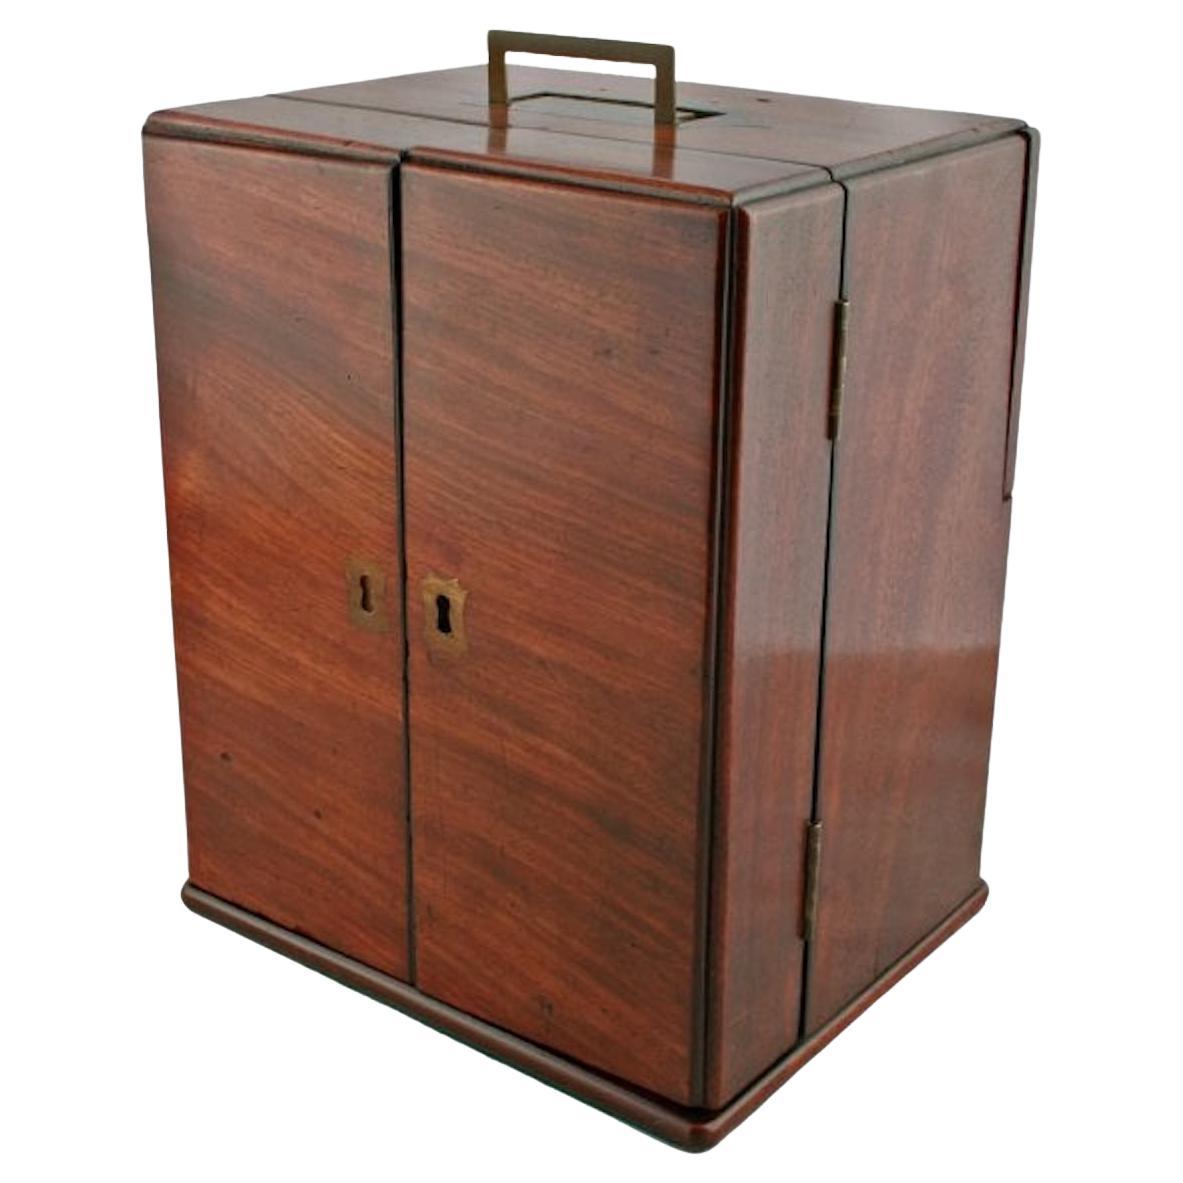 George III Apothecary cabinet

A George III mahogany apothecary cabinet.

The box has a brass military late handle set in the top and comprises a pair of doors that open and have space for six bottles.

The interior can hold four bottles and